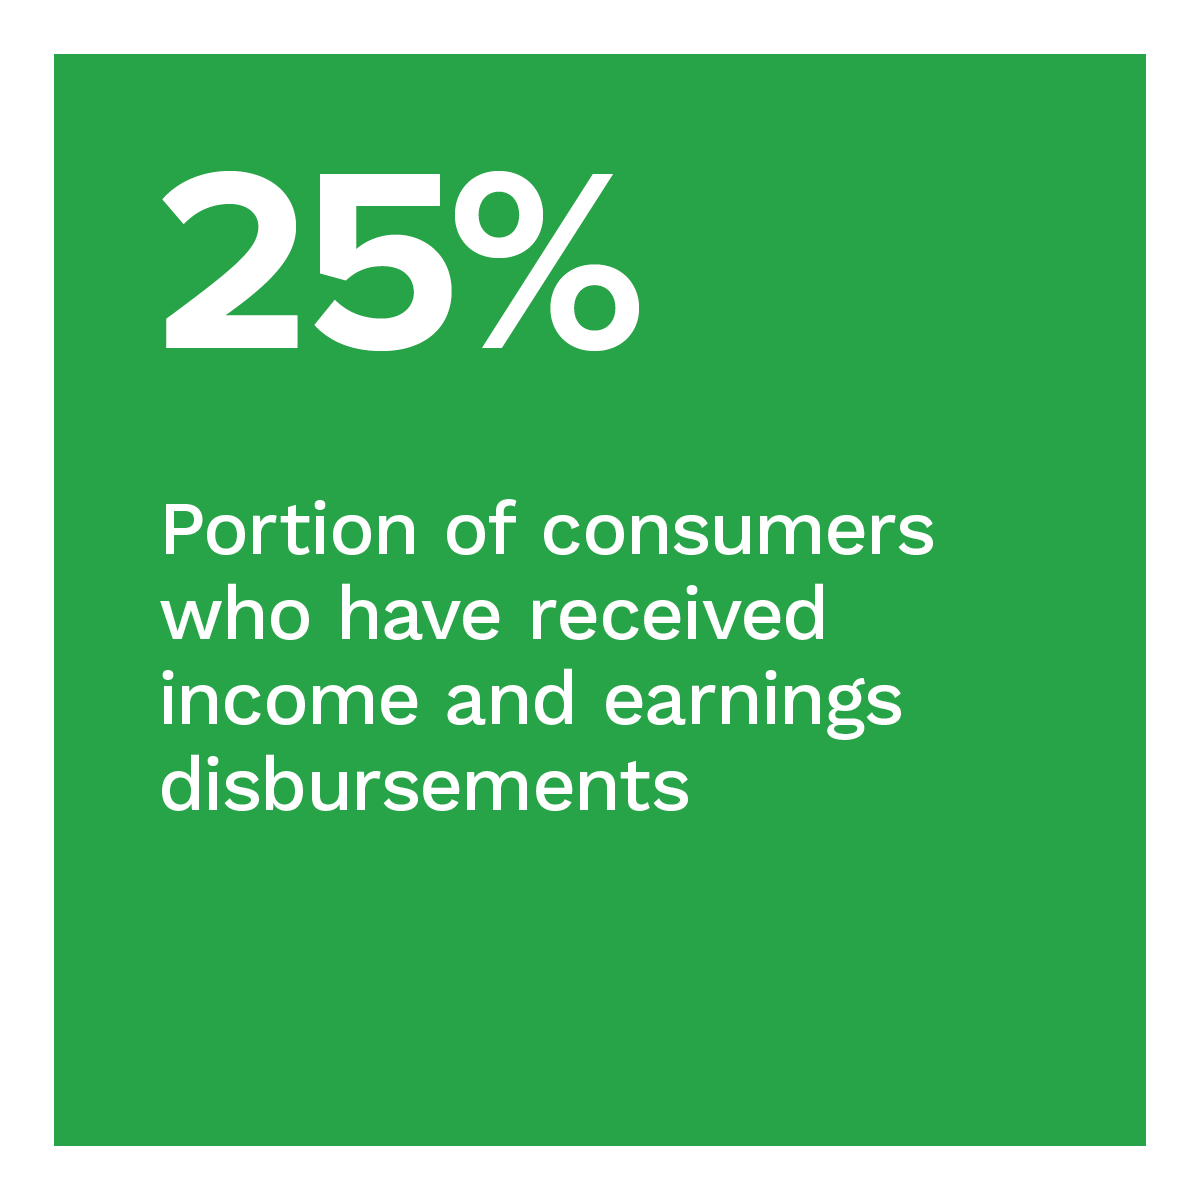 25%: Portion of consumers who have received income and earnings disbursements